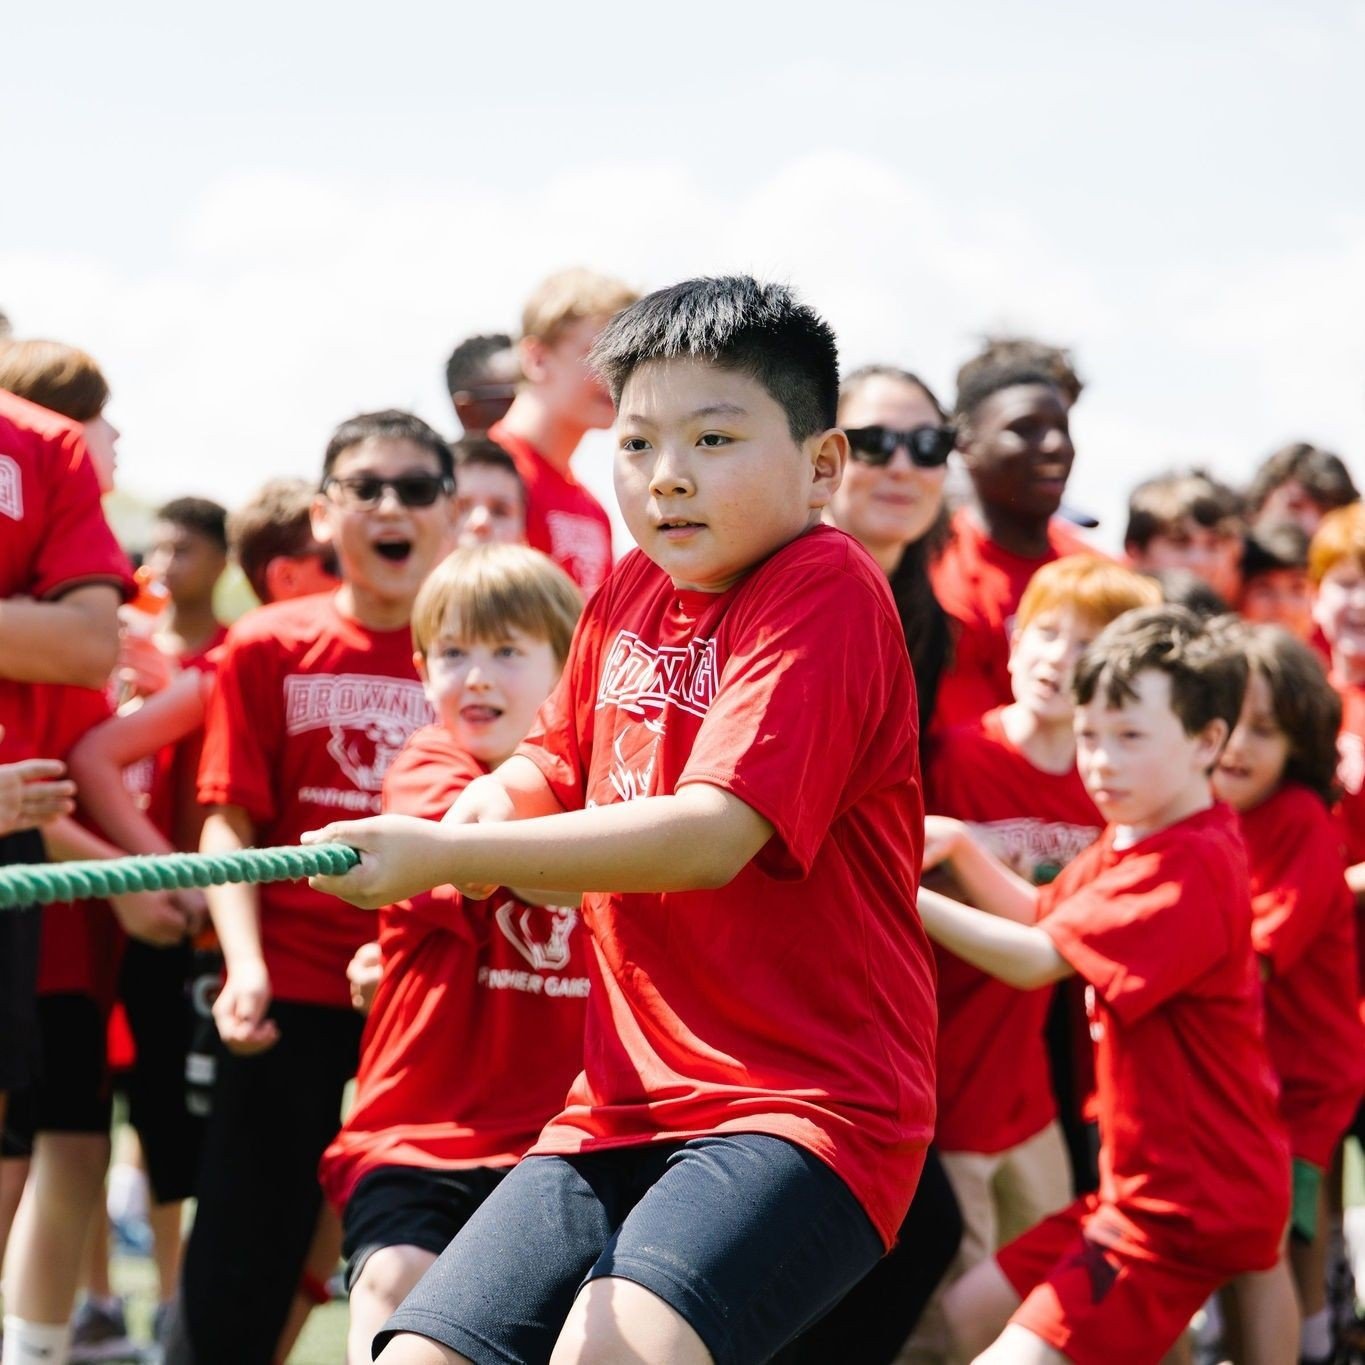 Under sunny skies, the Browning community shined at Field Day! It was a perfect blend of spirited competition and outdoor fun that united our boys in wholesome camaraderie. Beyond the games, the boys and faculty weaved bonds and crafted unforgettable